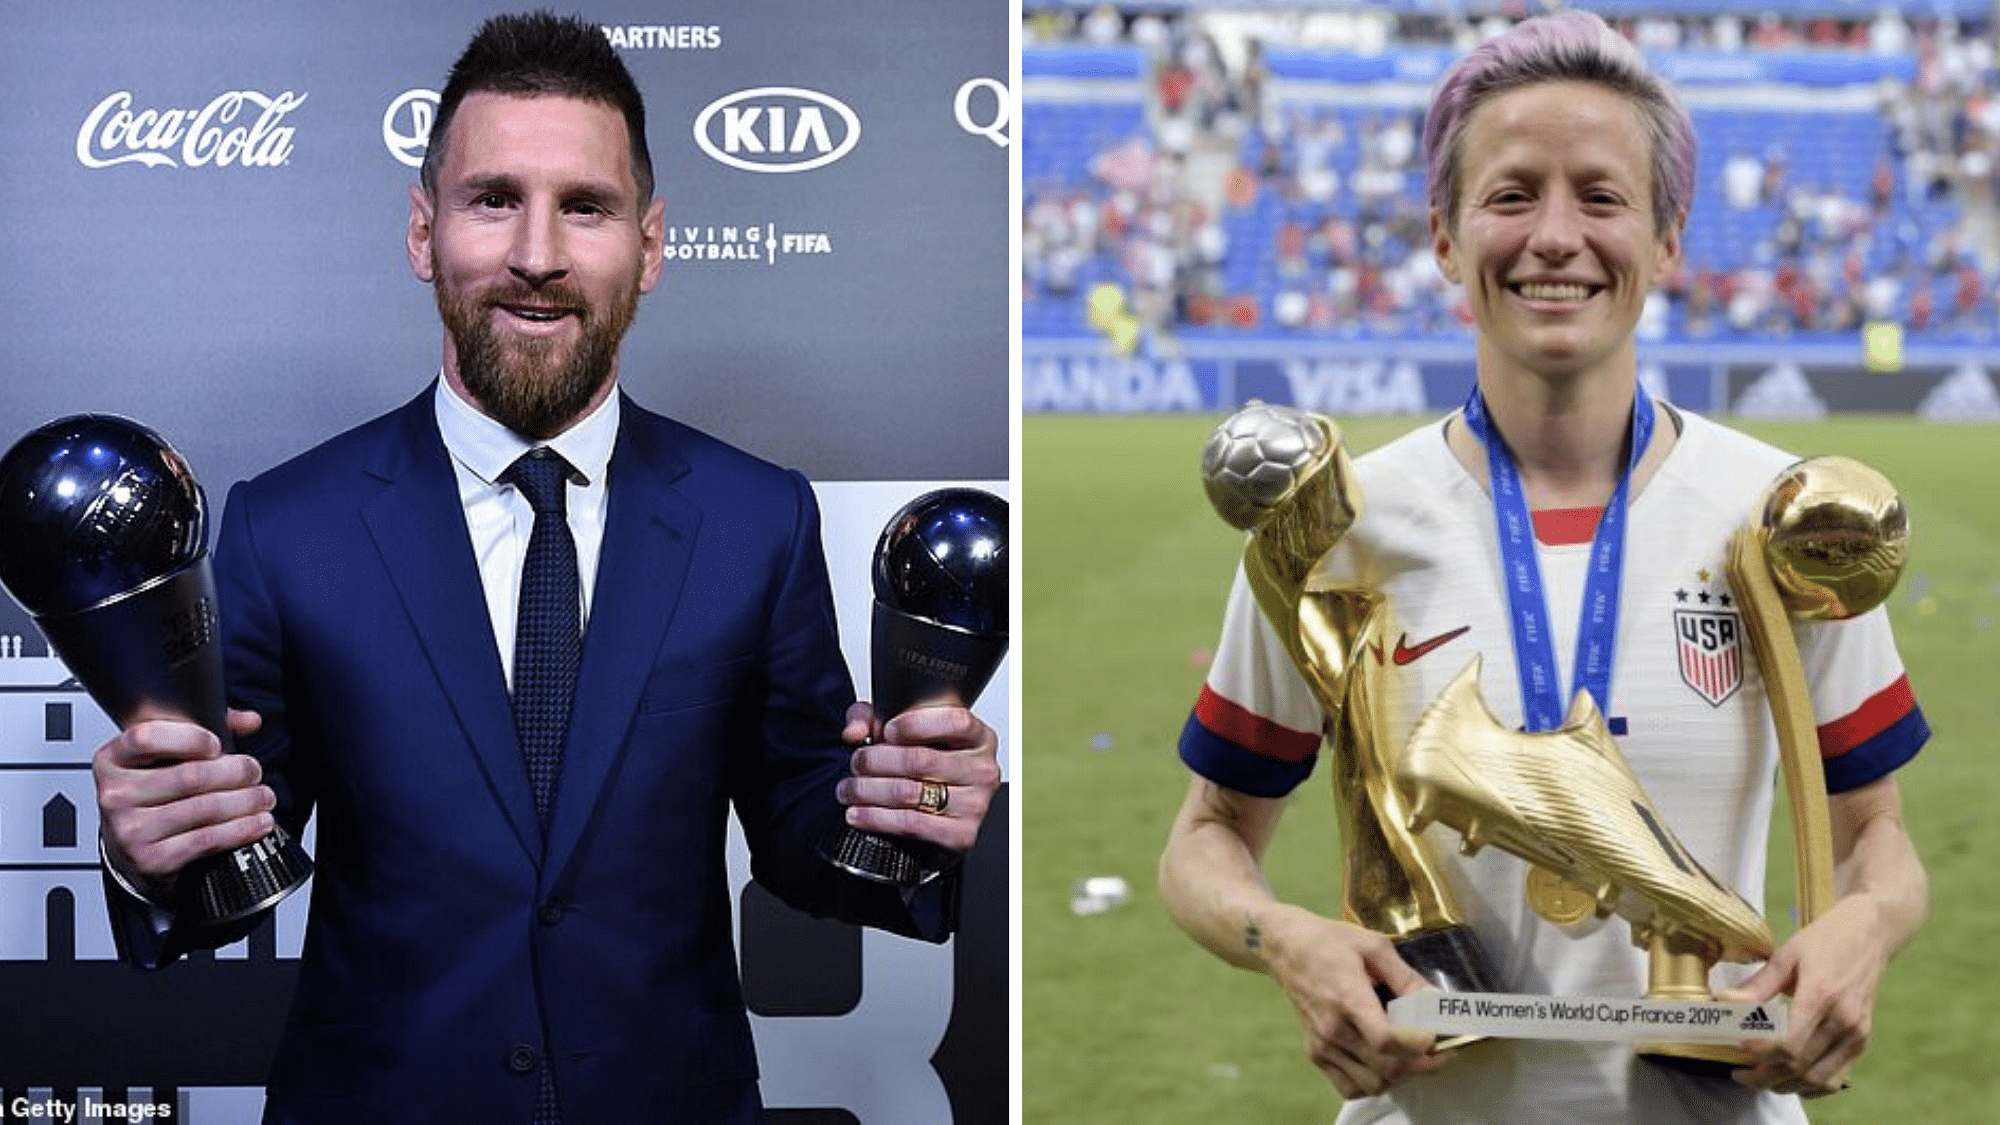 Lionel Messi won FIFA’s ‘The Best’ award earlier this year, while Megan Rapinoe picked up the Golden Boot in USA’s triumph at the Women’s World Cup.